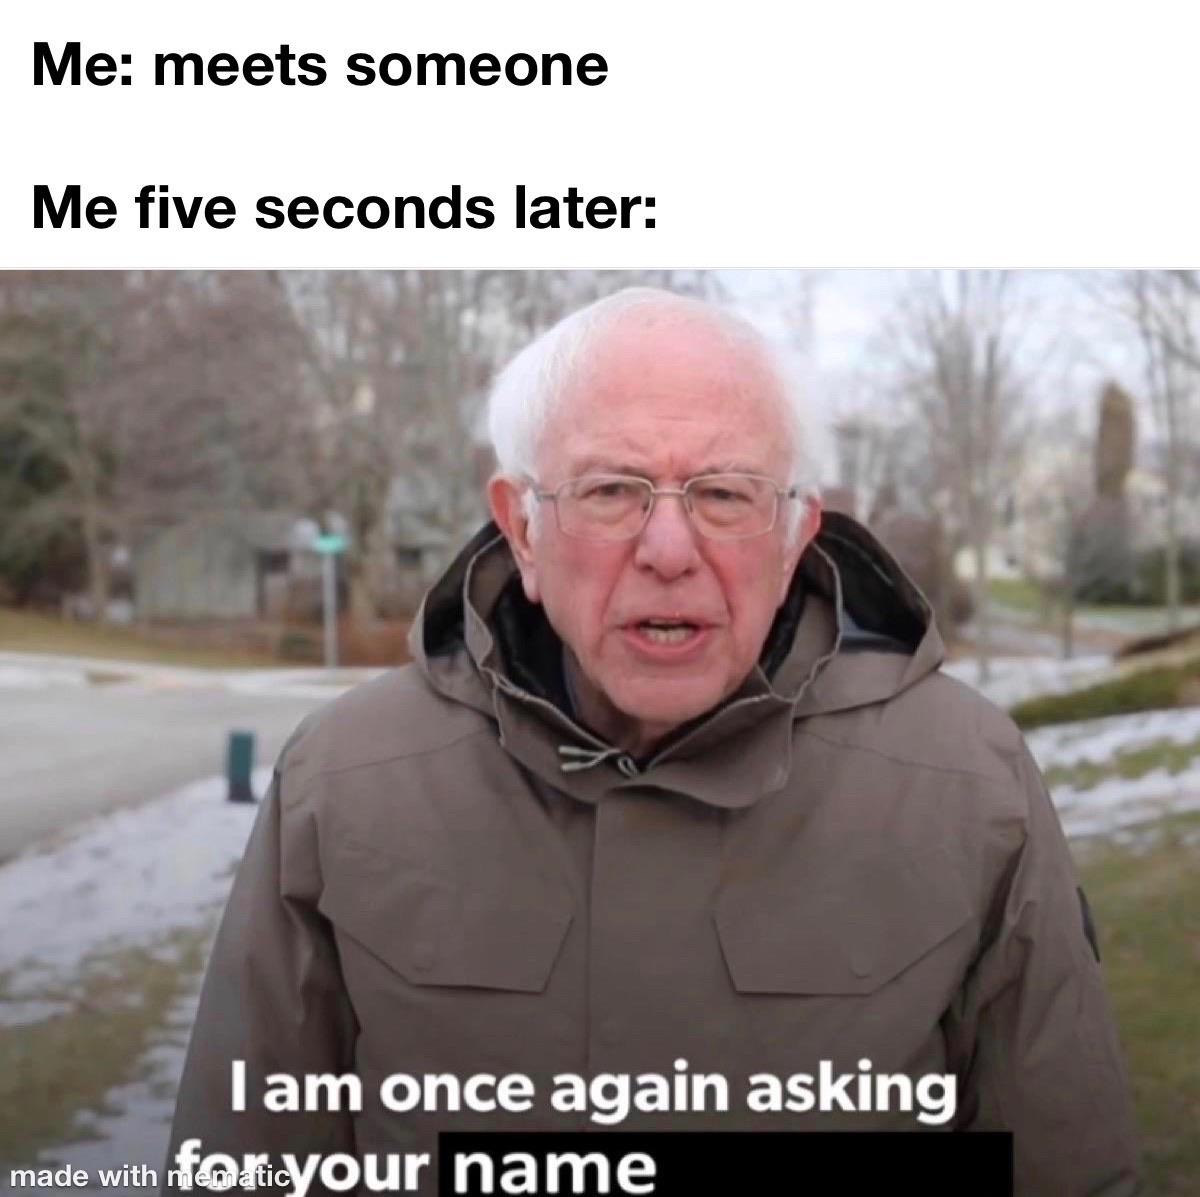 bernie sanders i am once again asking - Me meets someone Me five seconds later I am once again asking made with foxlicyour name